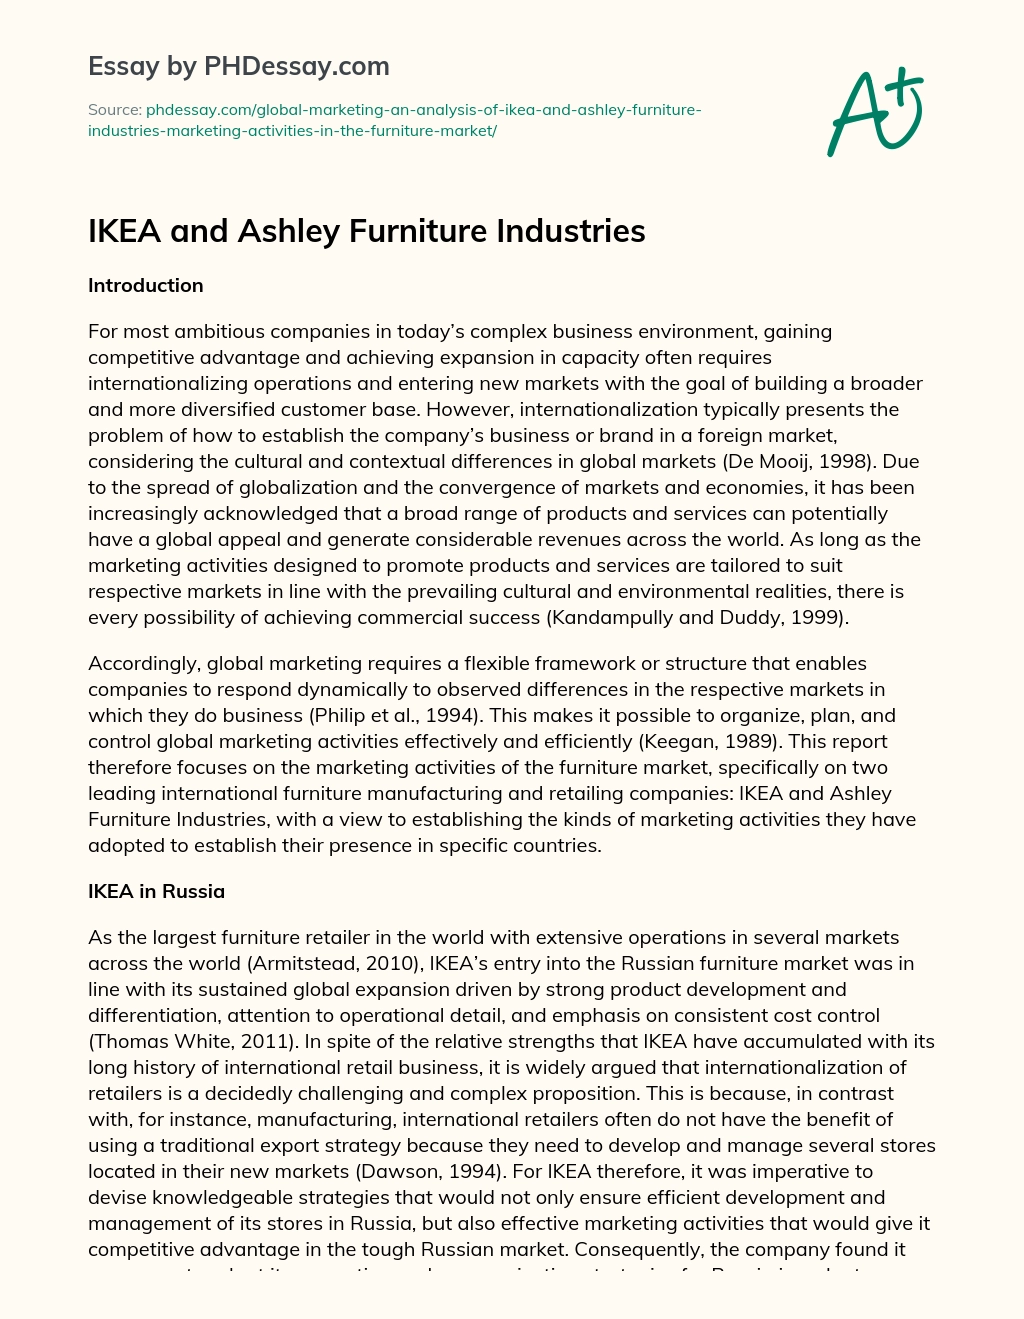 IKEA and Ashley Furniture Industries essay